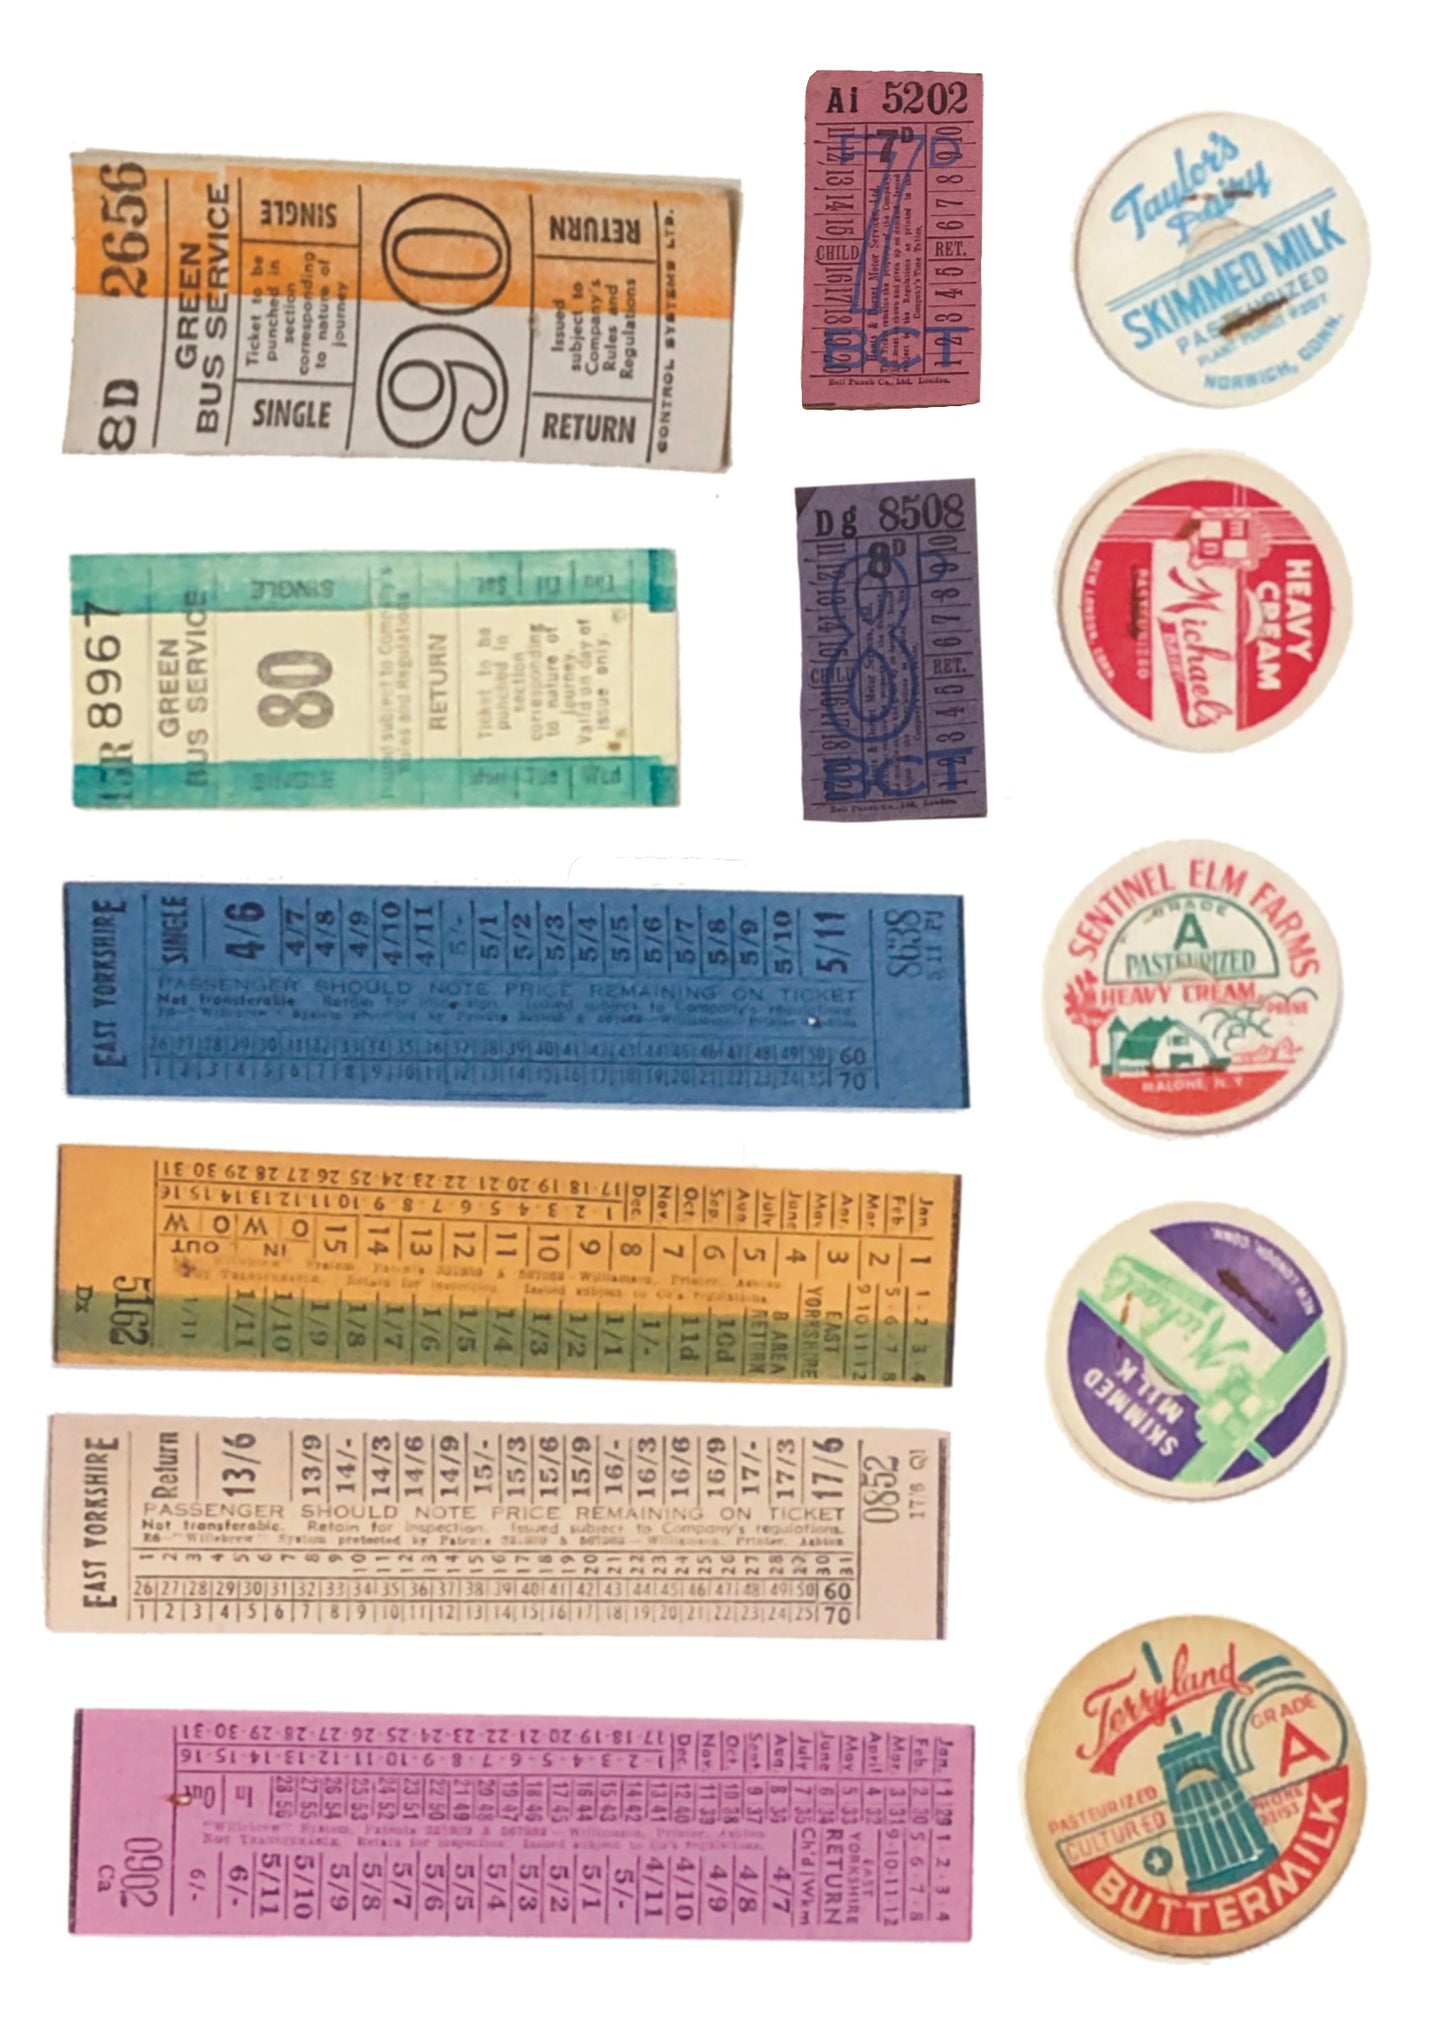 Vintage tickets 2 sheets - Rub-on / Transfer Stickers 027 and 028